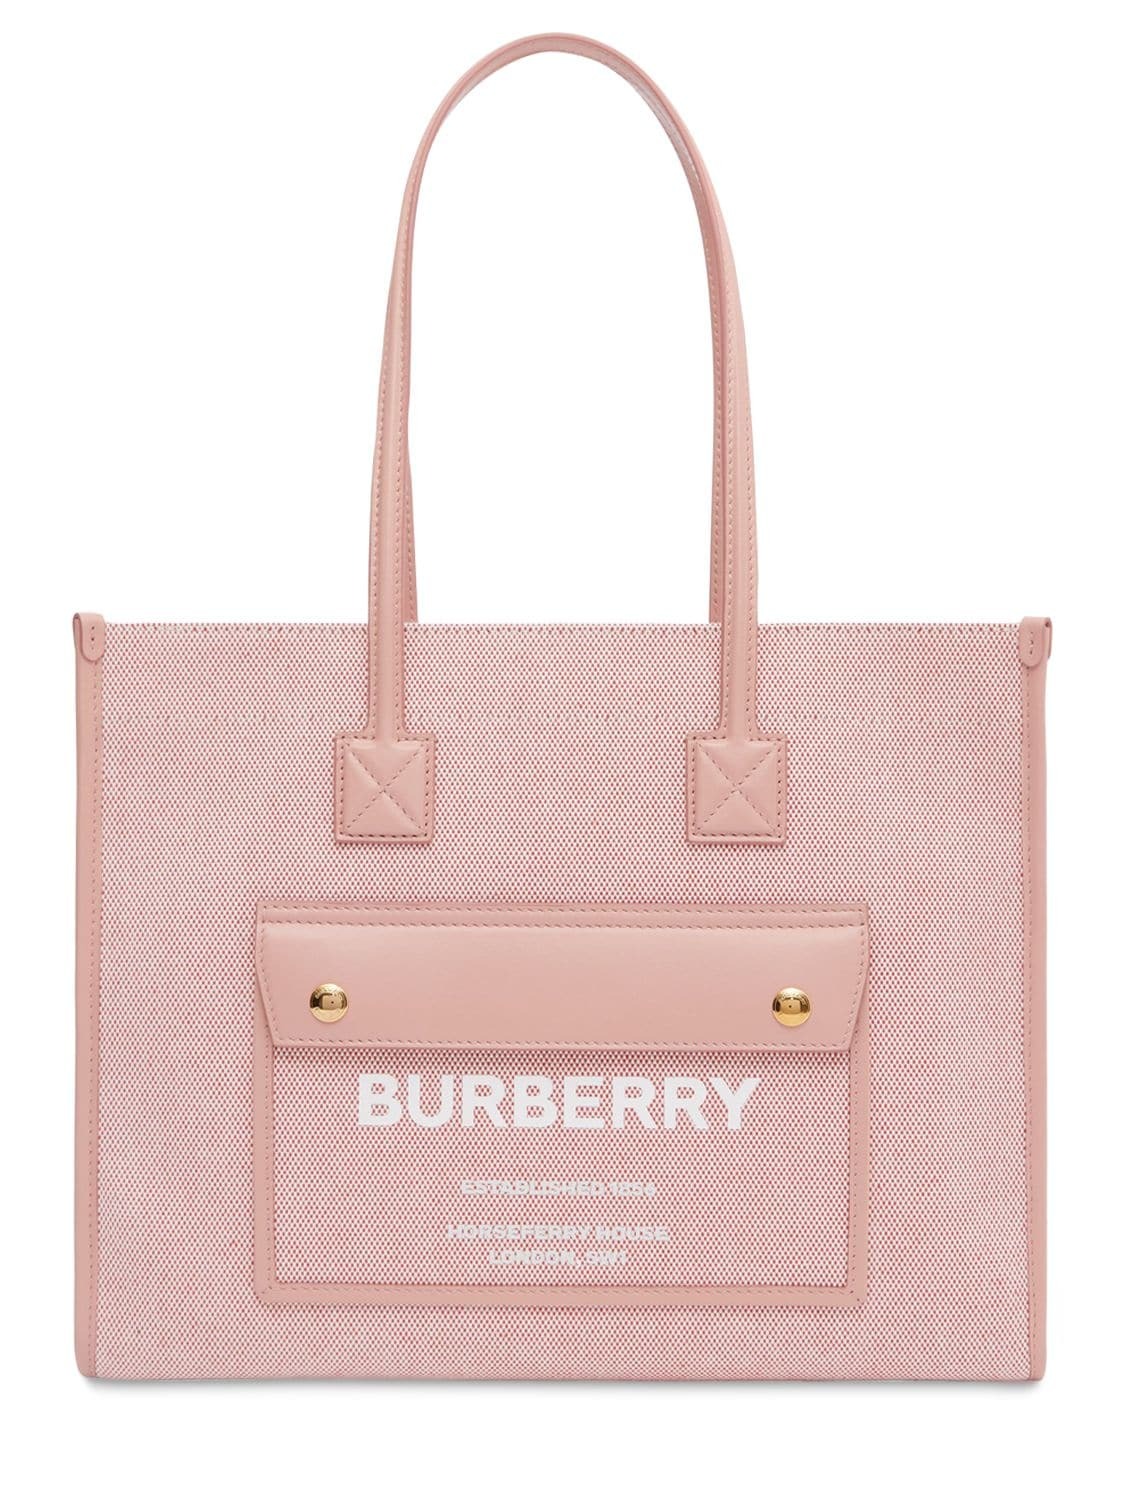 BURBERRY Small Freya Leather & Canvas Tote Bag in pink / red